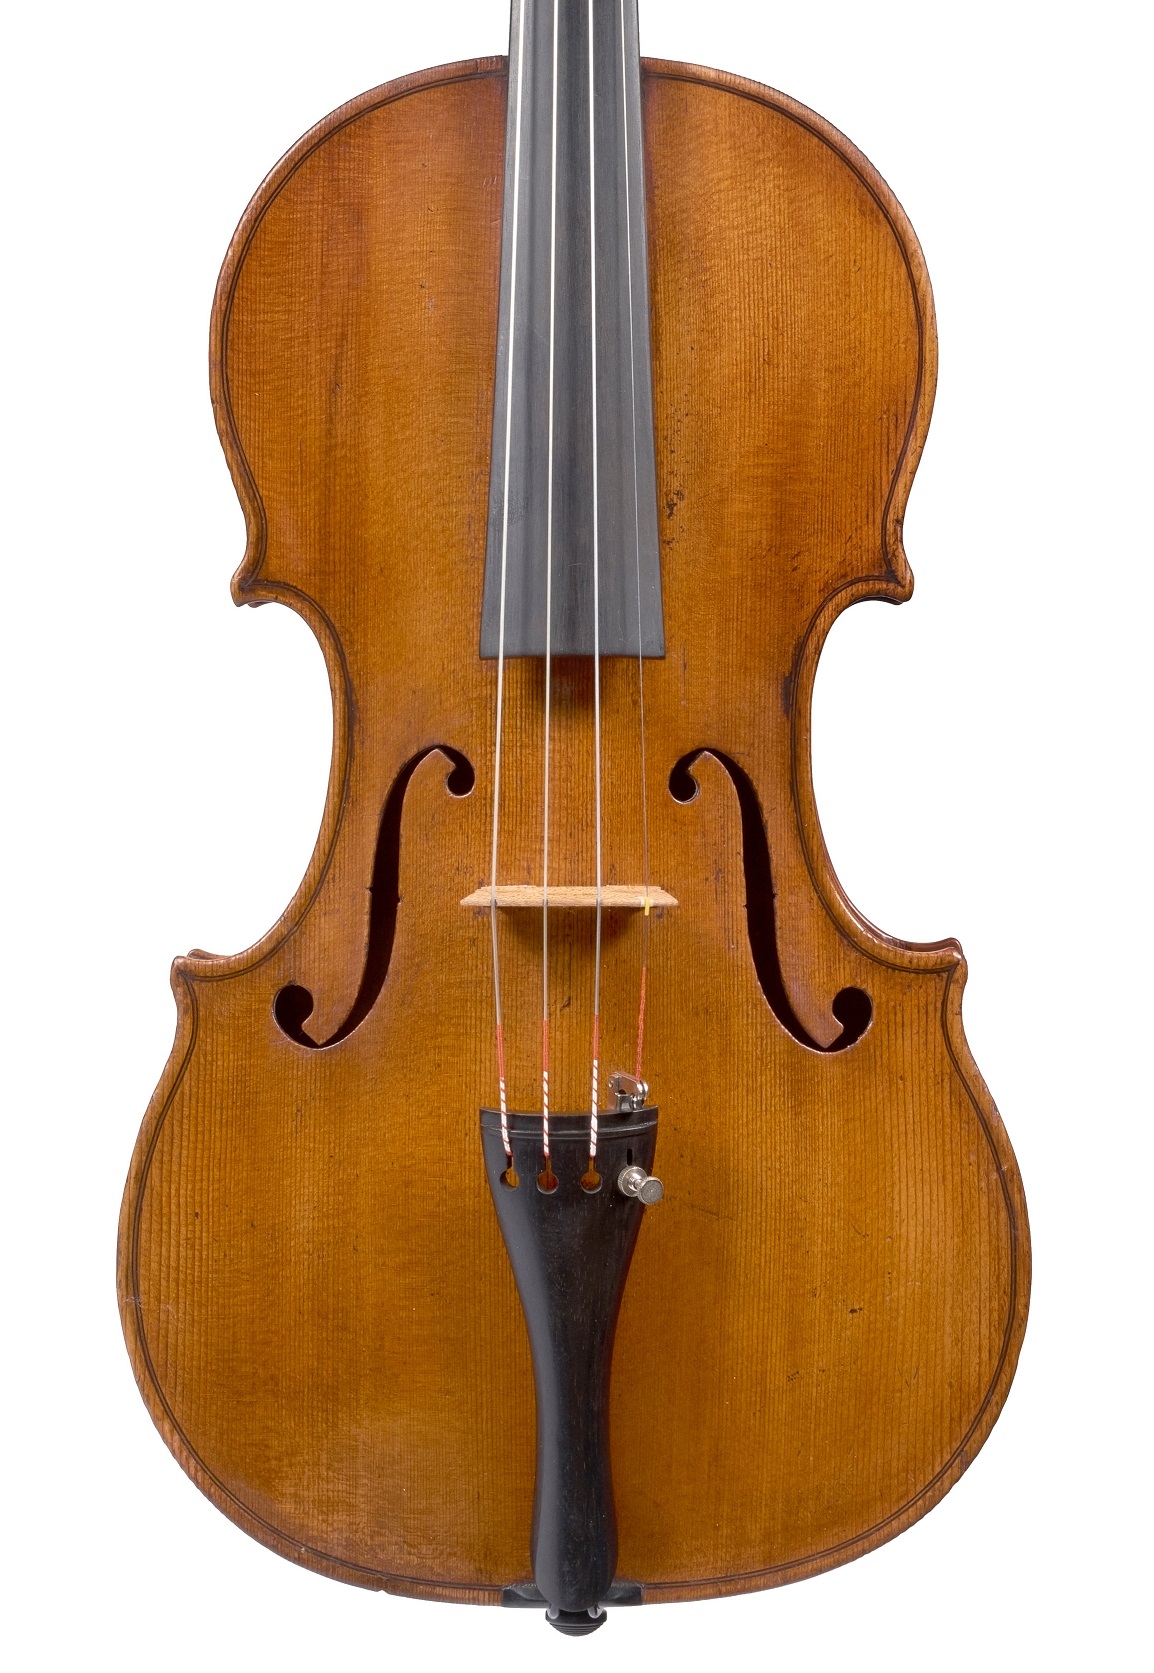 Front of the Gaetano Sgarabotto violin from the Norman Rosenberg collection to be sold at Ingles & Hayday